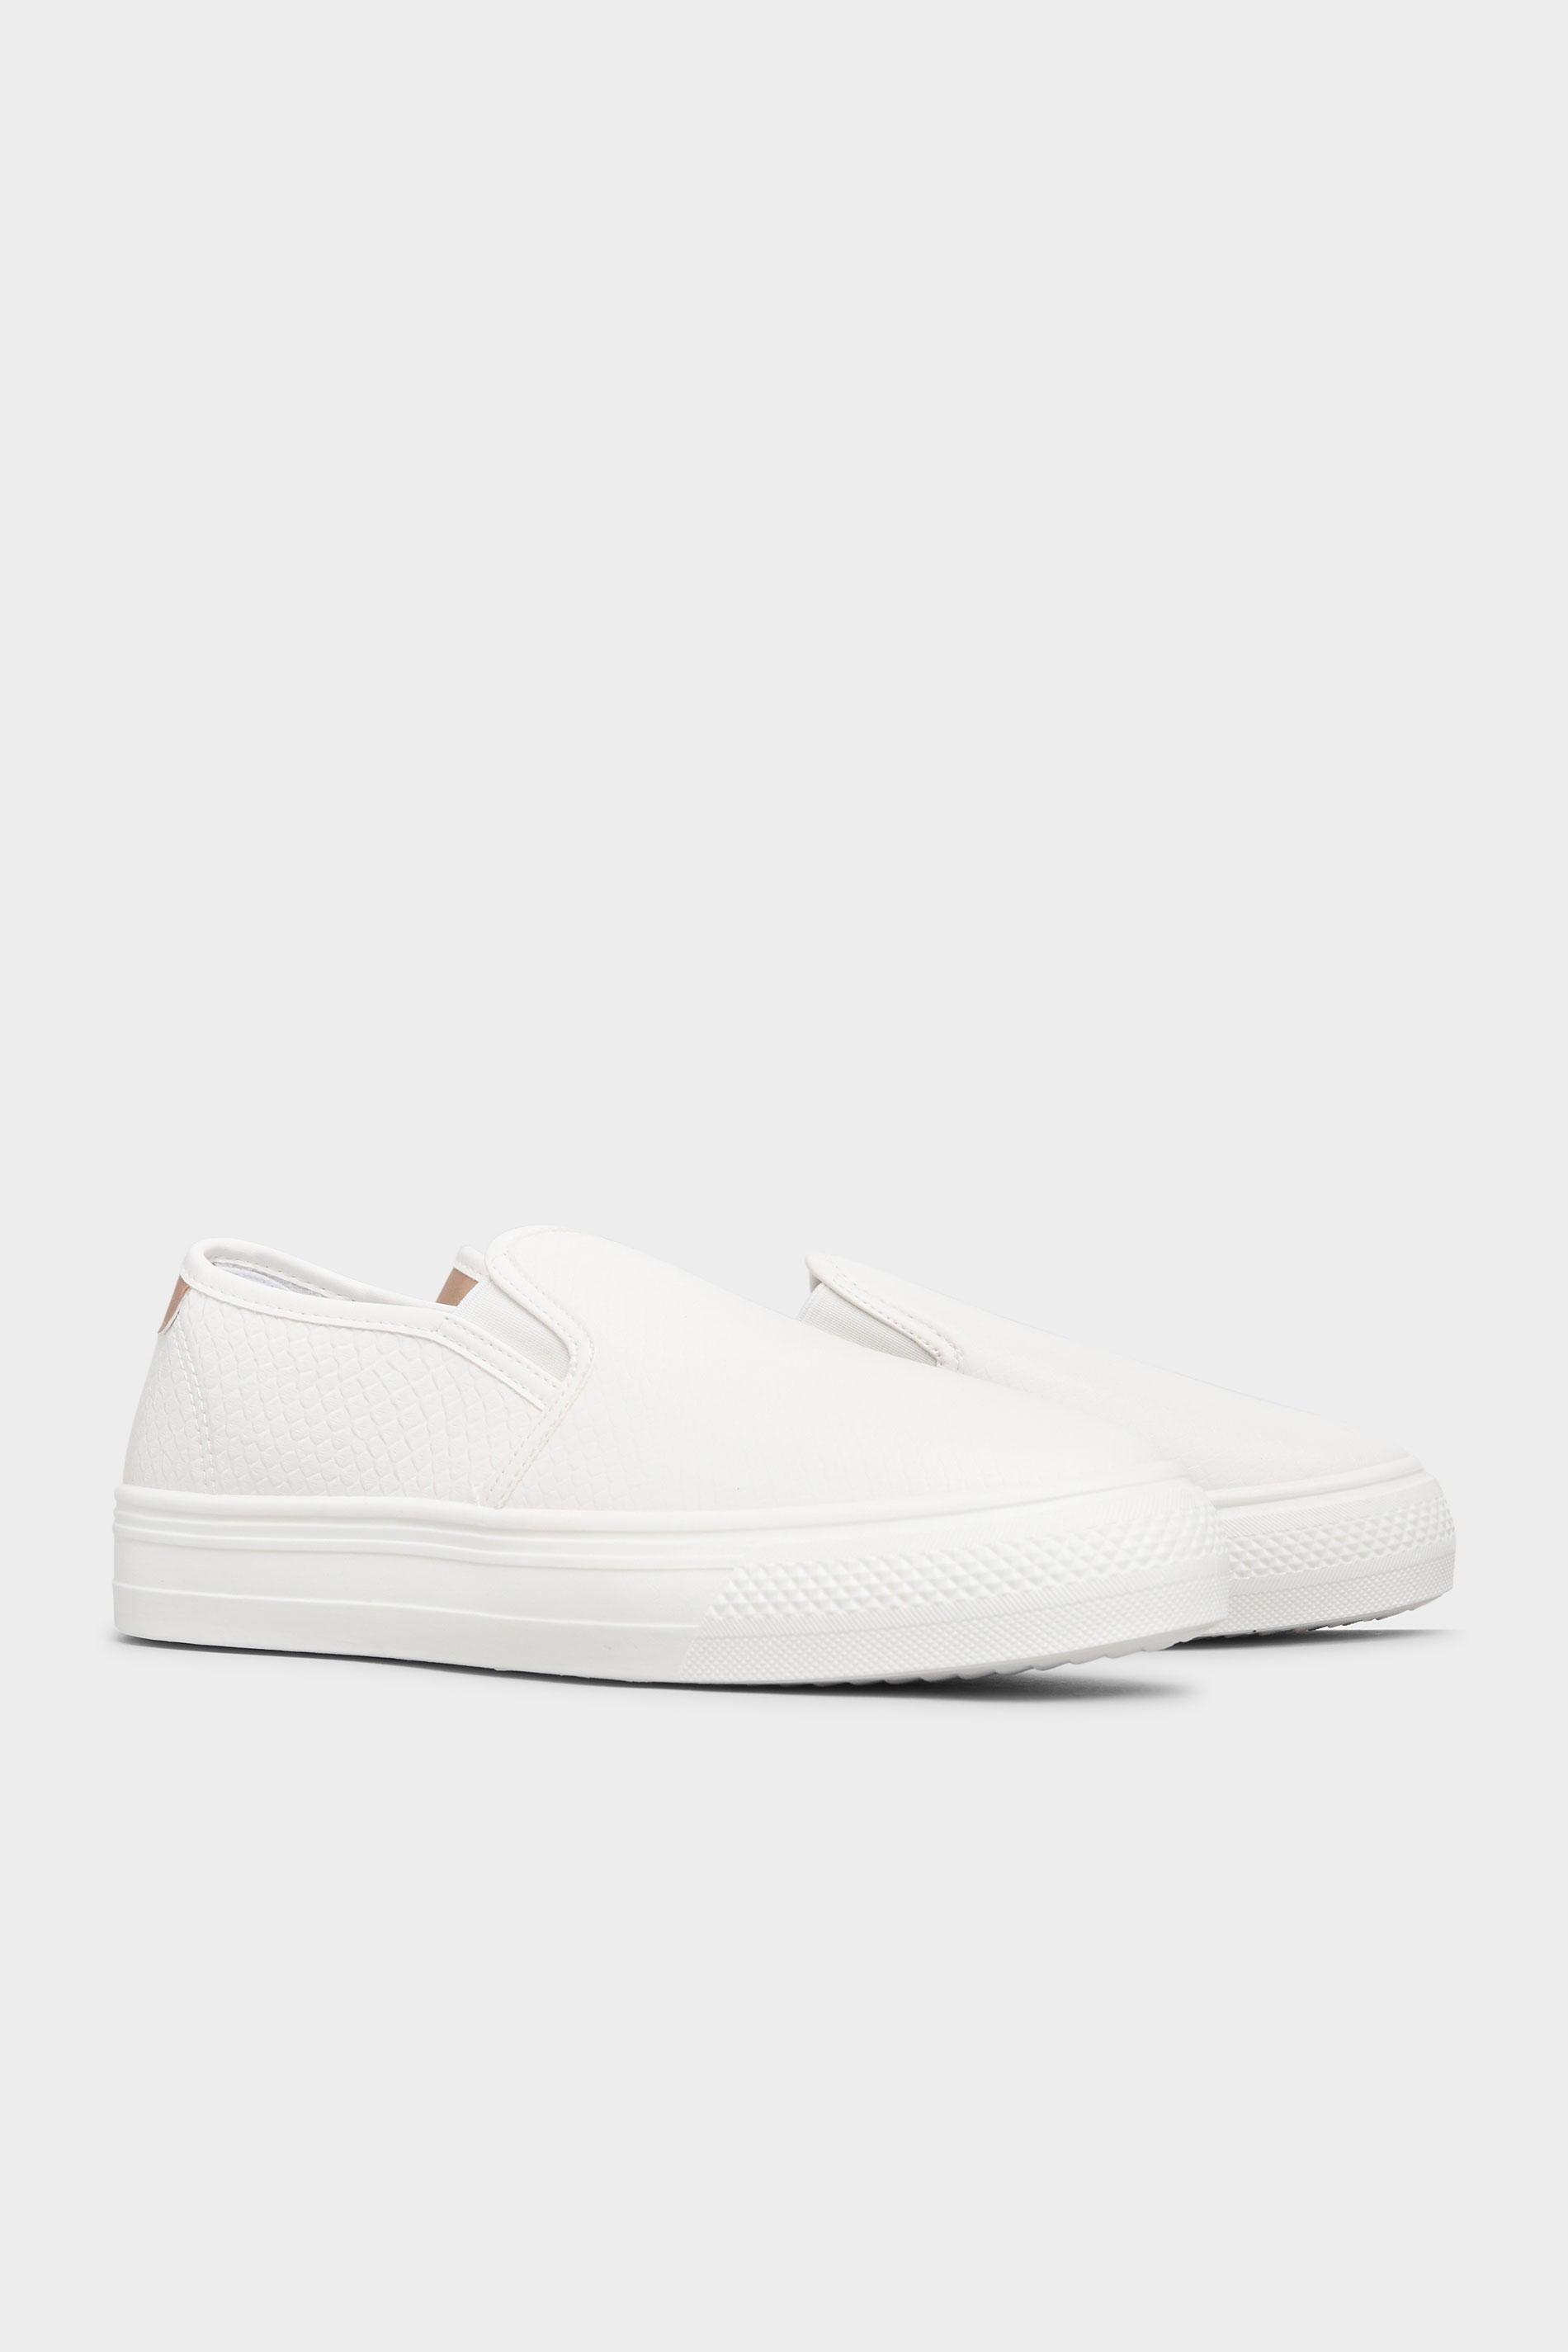 White Croc Platform Slip On Trainers In Regular Fit | Long Tall Sally